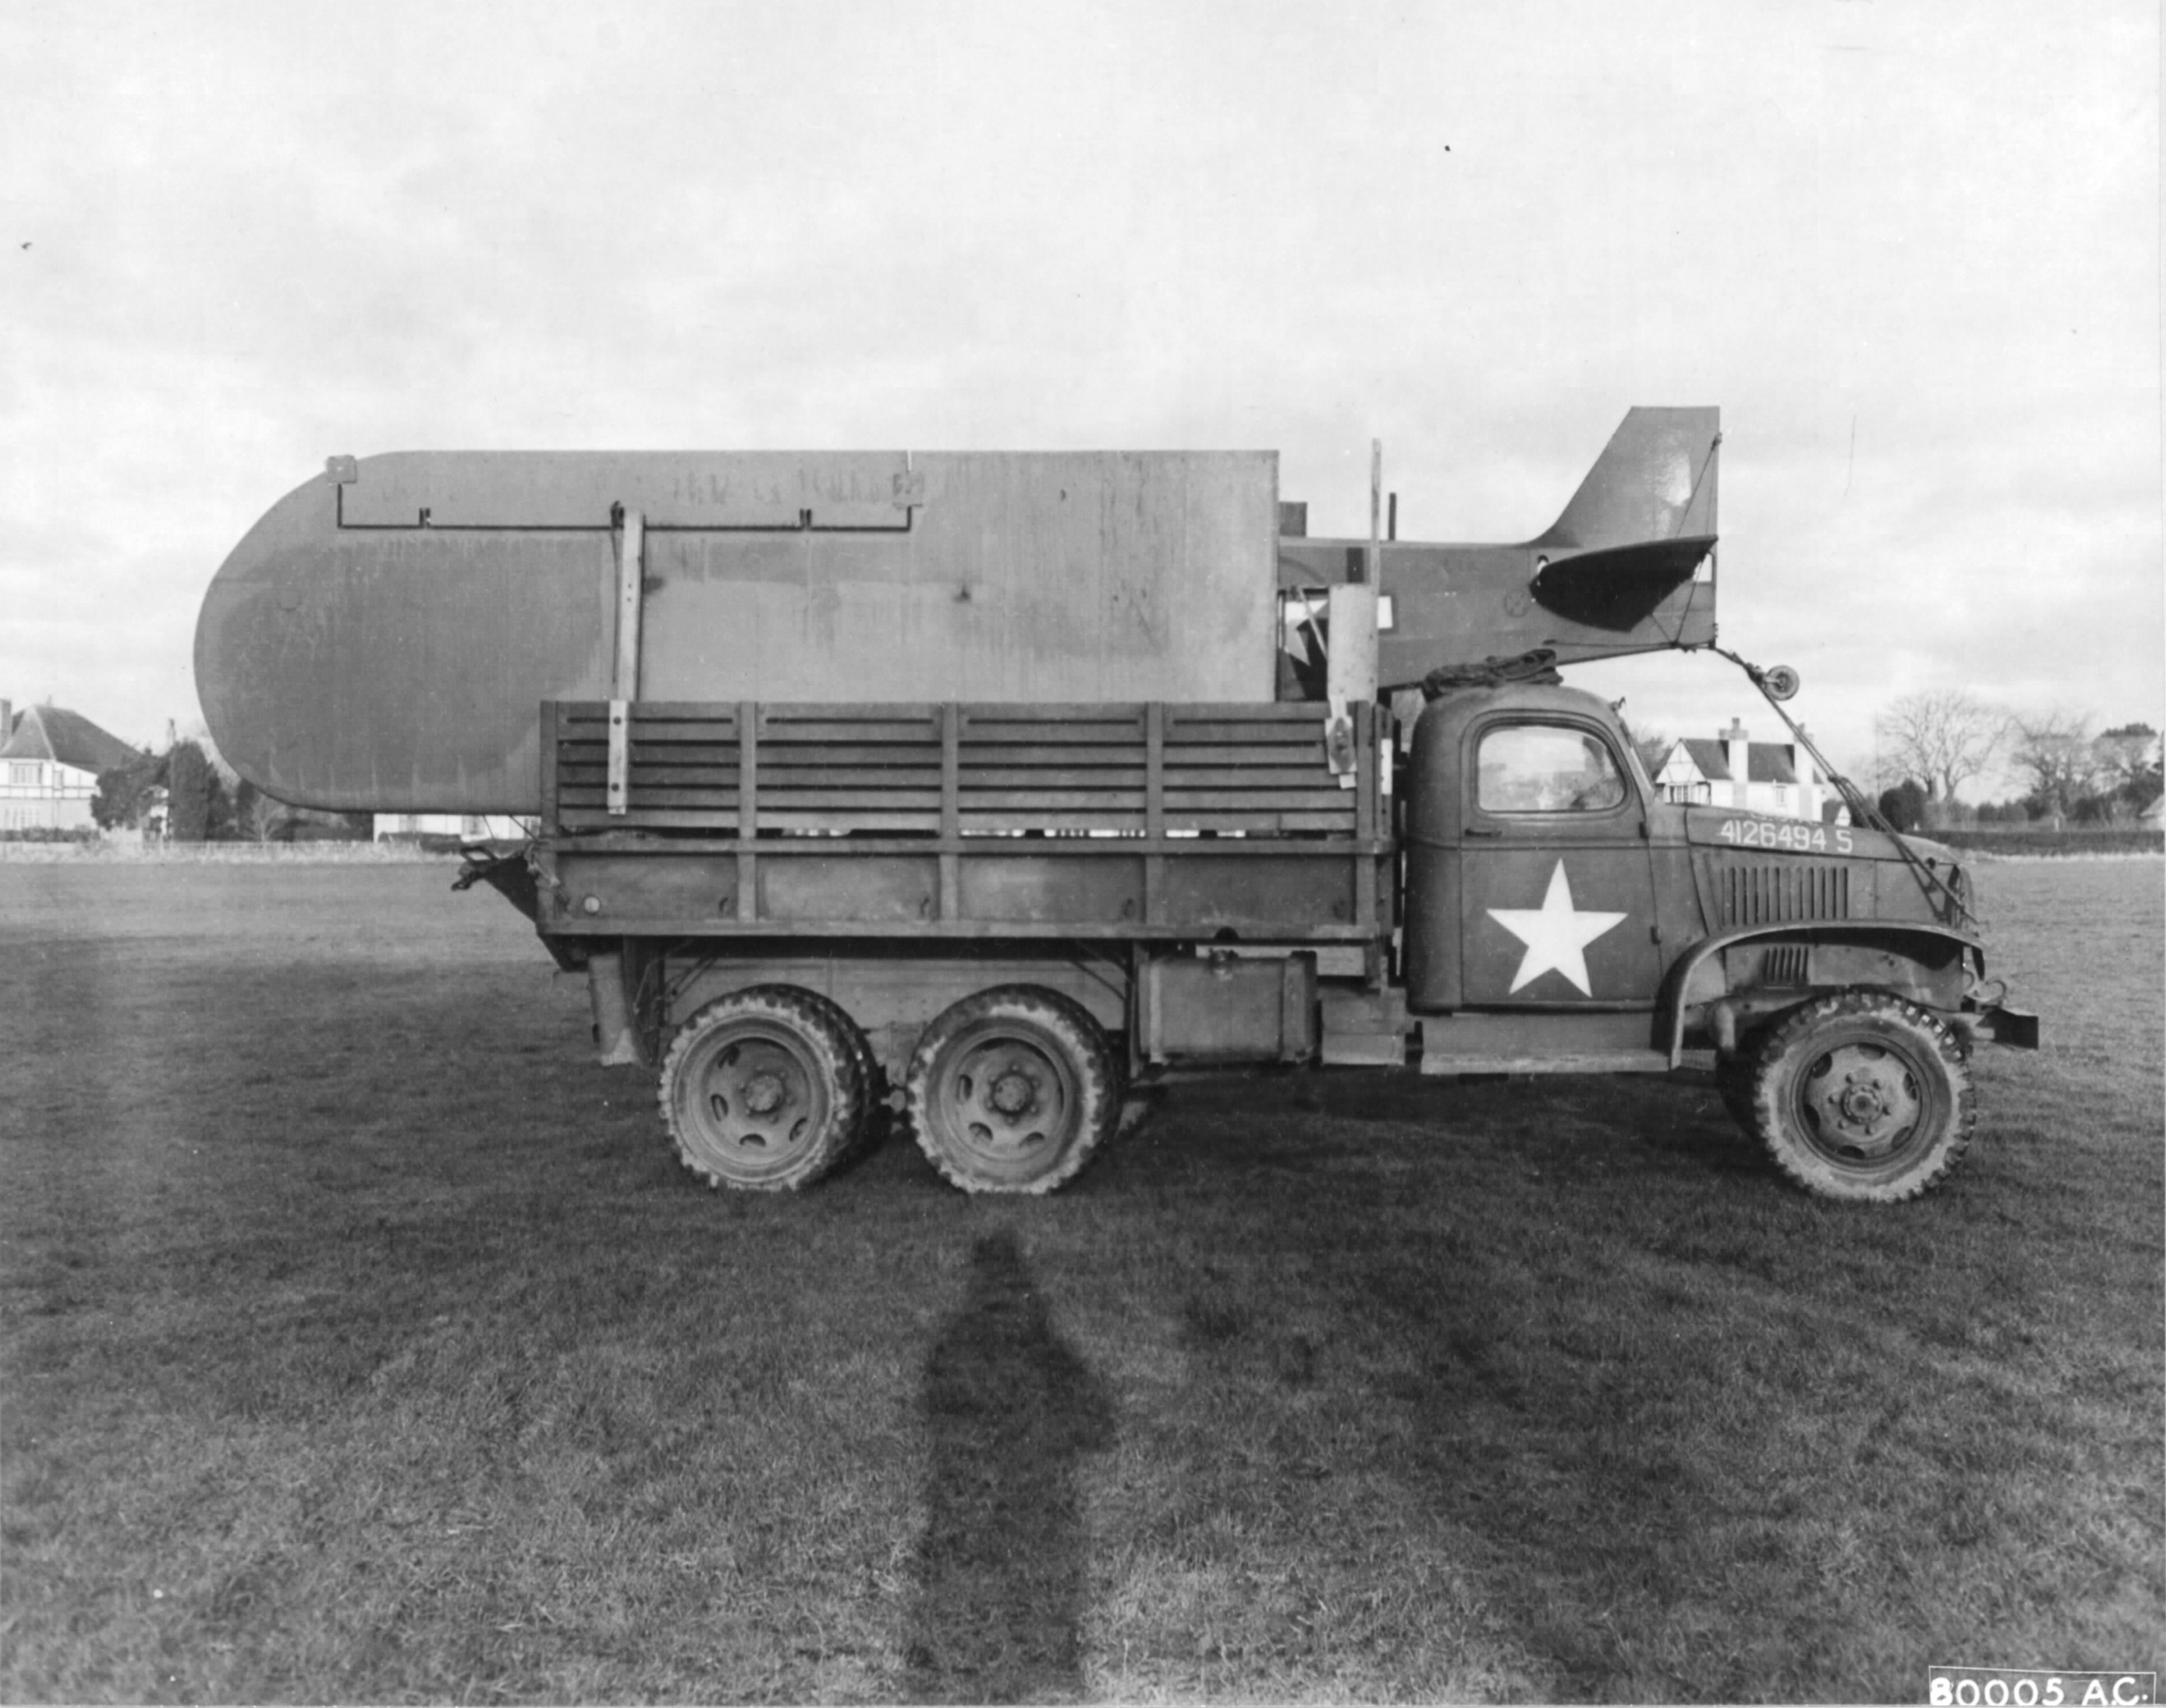 Piper L-4 Grasshopper observation aircraft on a 2.5 ton CCKW truck in preparation for the D-Day landings. Devon, England, United Kingdom, Feb 12 1944.